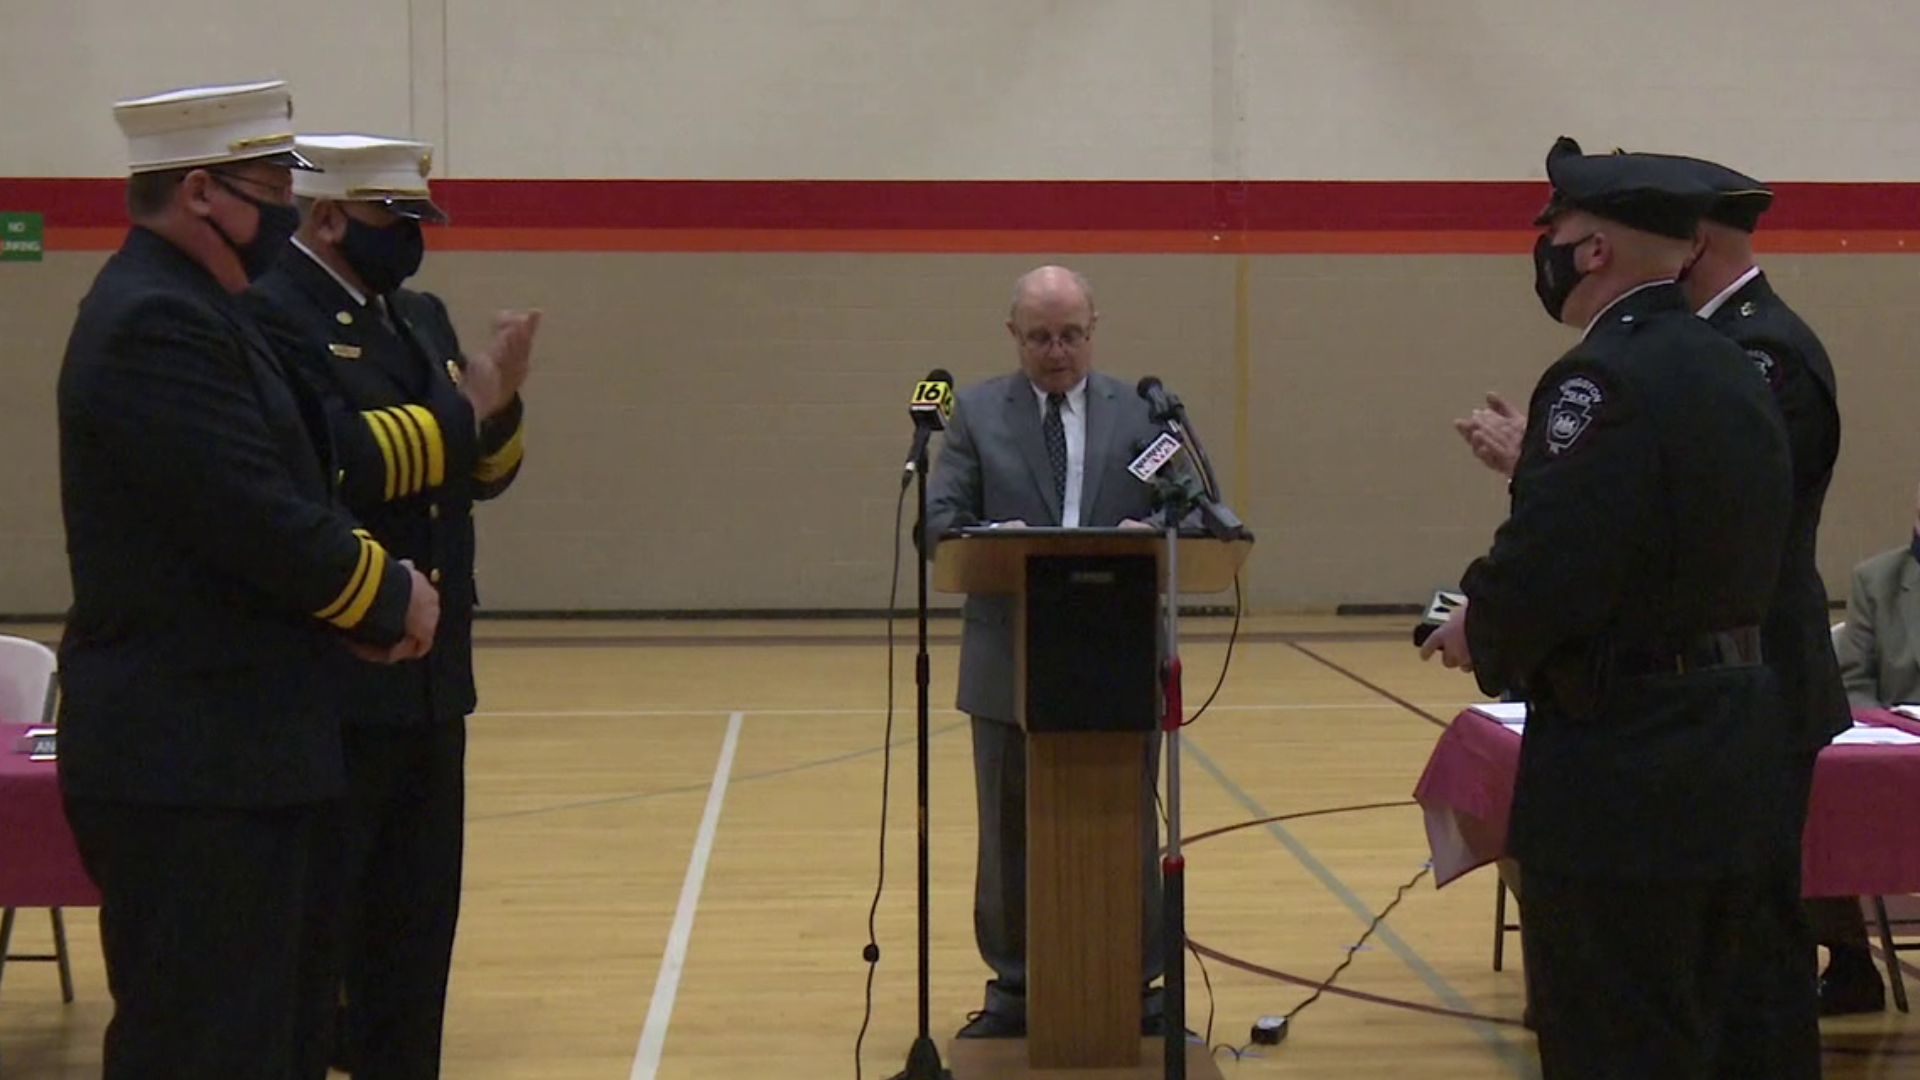 After saving two children from a house fire in March, on Monday they were presented with a special honor.